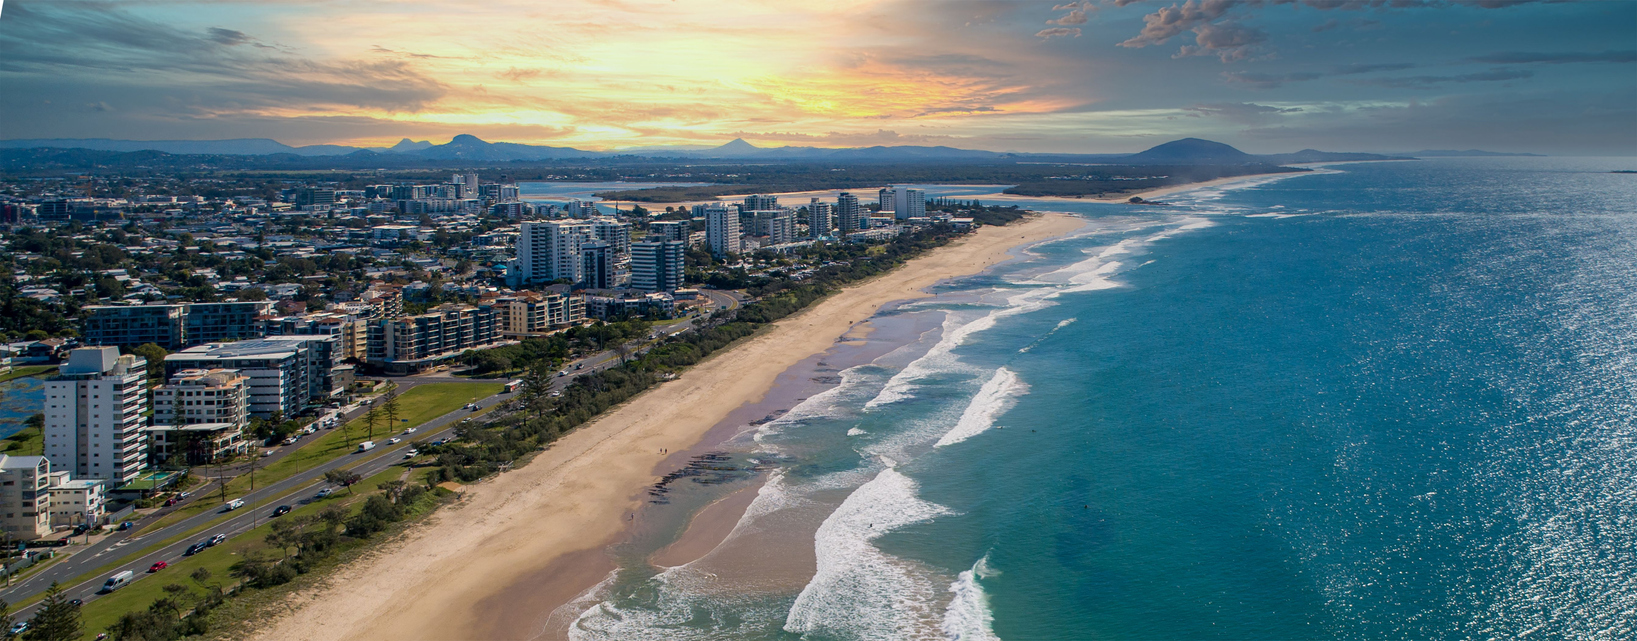 Breathtaking aerial view of the ocean and the city at the sunset in Queensland, Australia